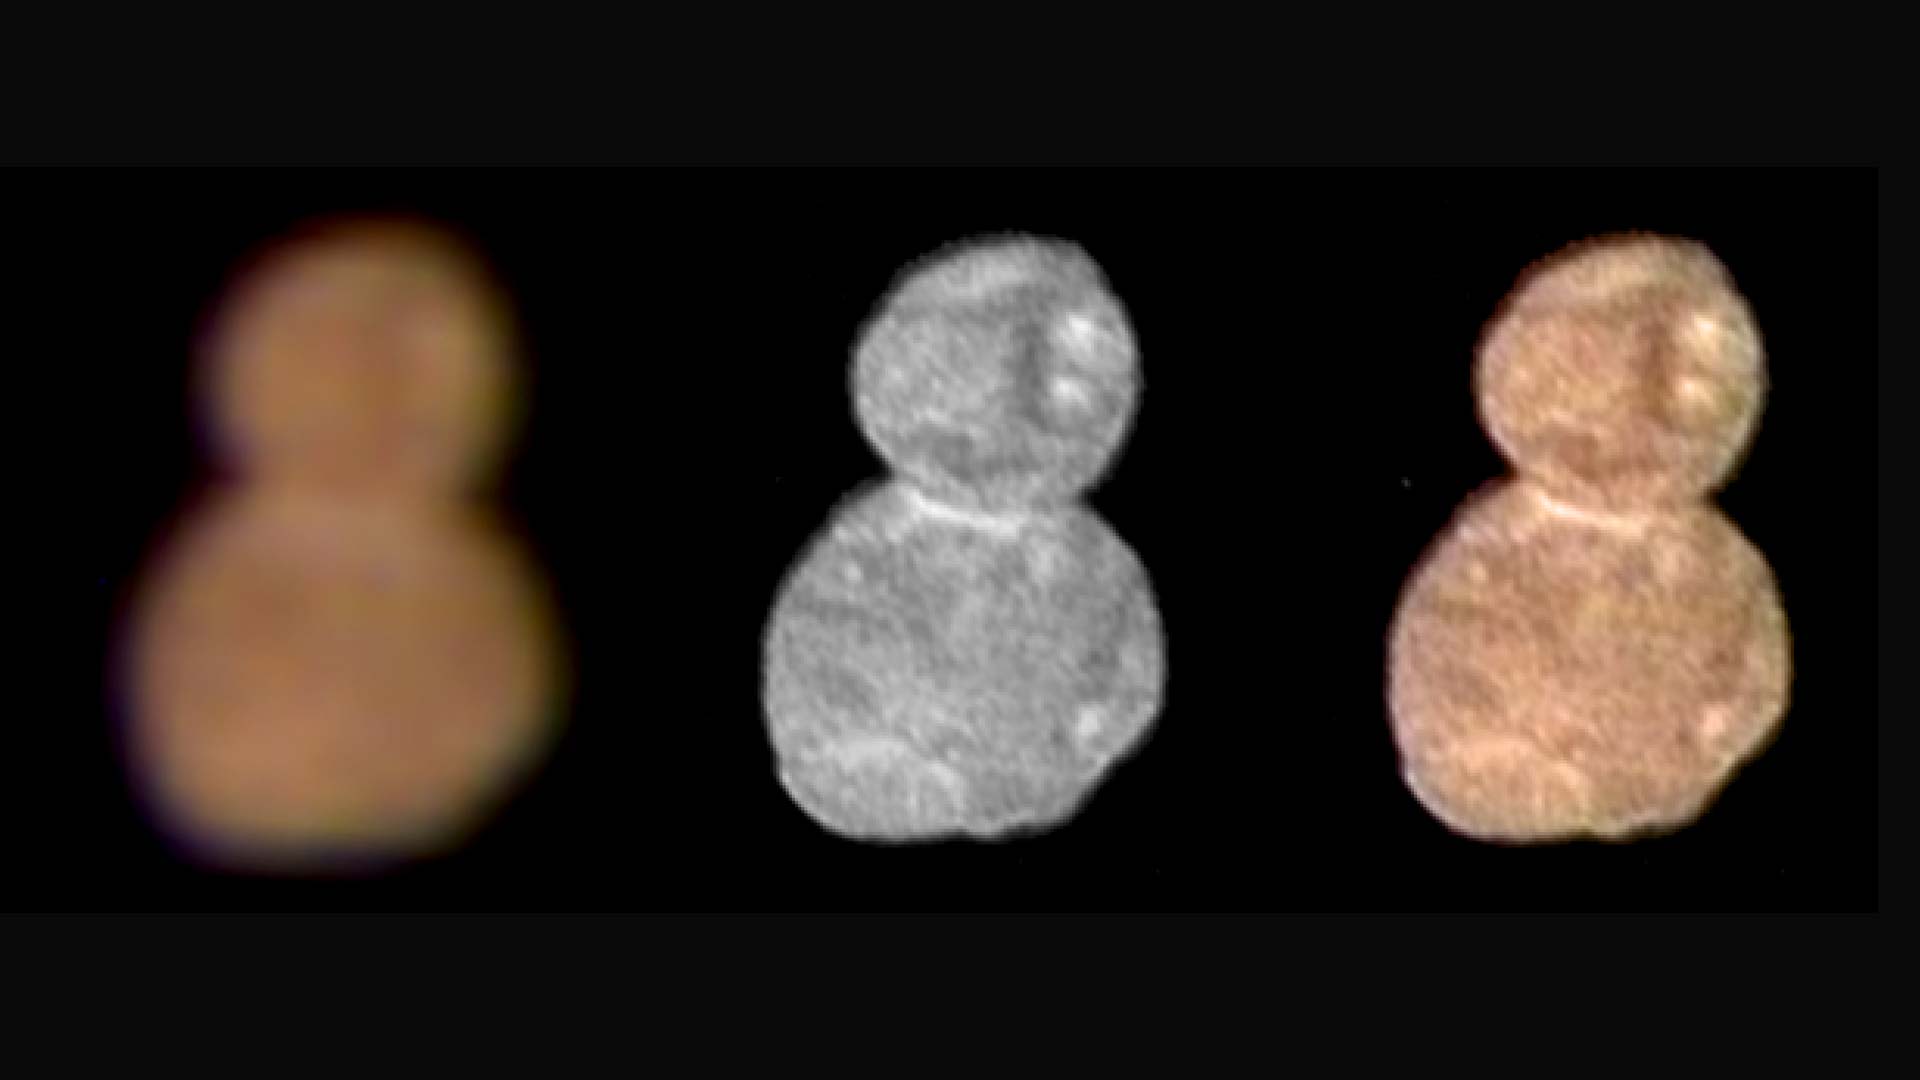 The first color image of Ultima Thule, captured at a distance of 85,000 miles. The image at right shows an overlay of the color image at left on the center image. Learn [more](http://pluto.jhuapl.edu/News-Center/News-Article.php?page=20190102).
